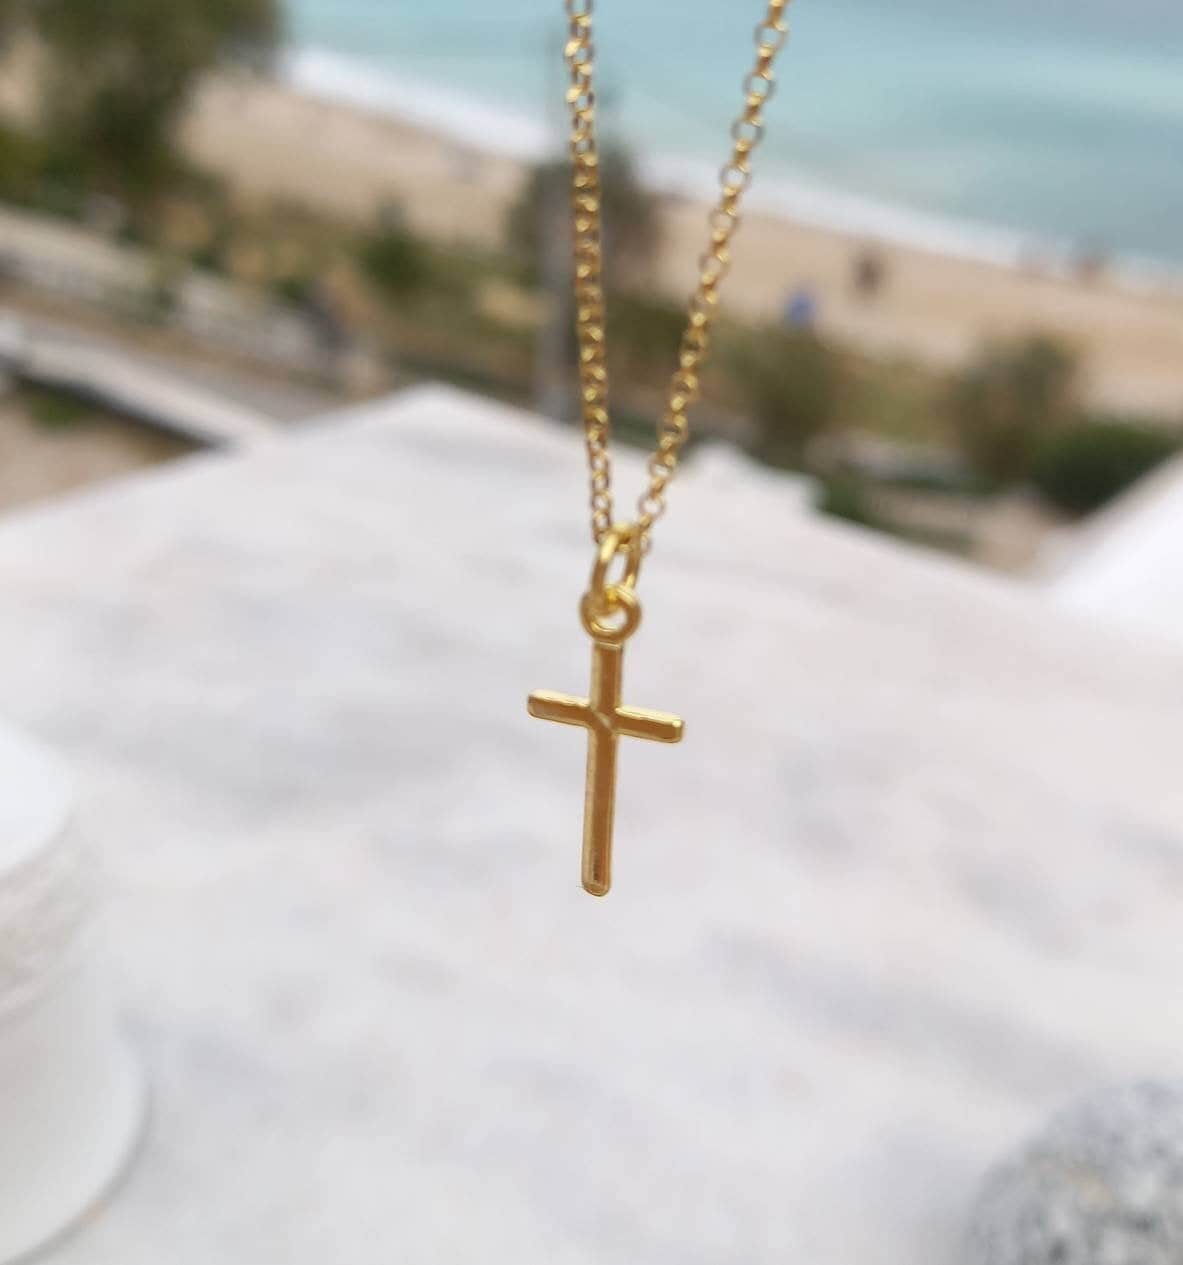 Qwzndzgr Gold Cross Necklace for Women 14K Gold Plated Chain Necklace Dainty Gold Cross Pendant Necklace Simple Cute Necklaces for Girls Christian